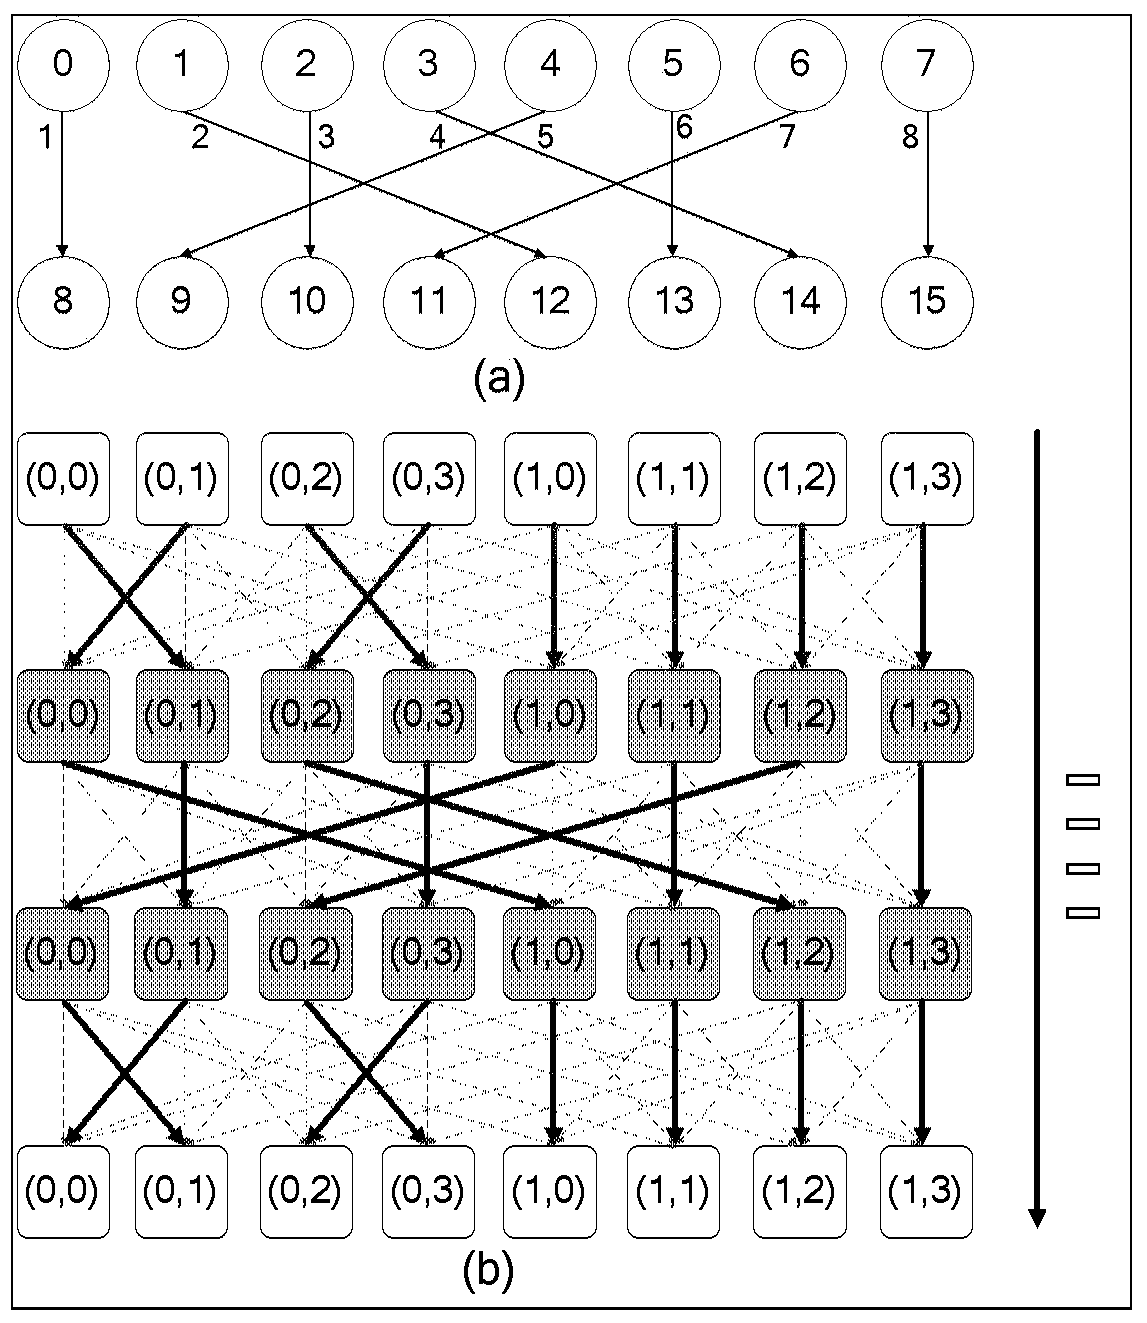 A Coarse-Grained Reconfigurable Array Circuit Based on Auto-routing Interconnect Network